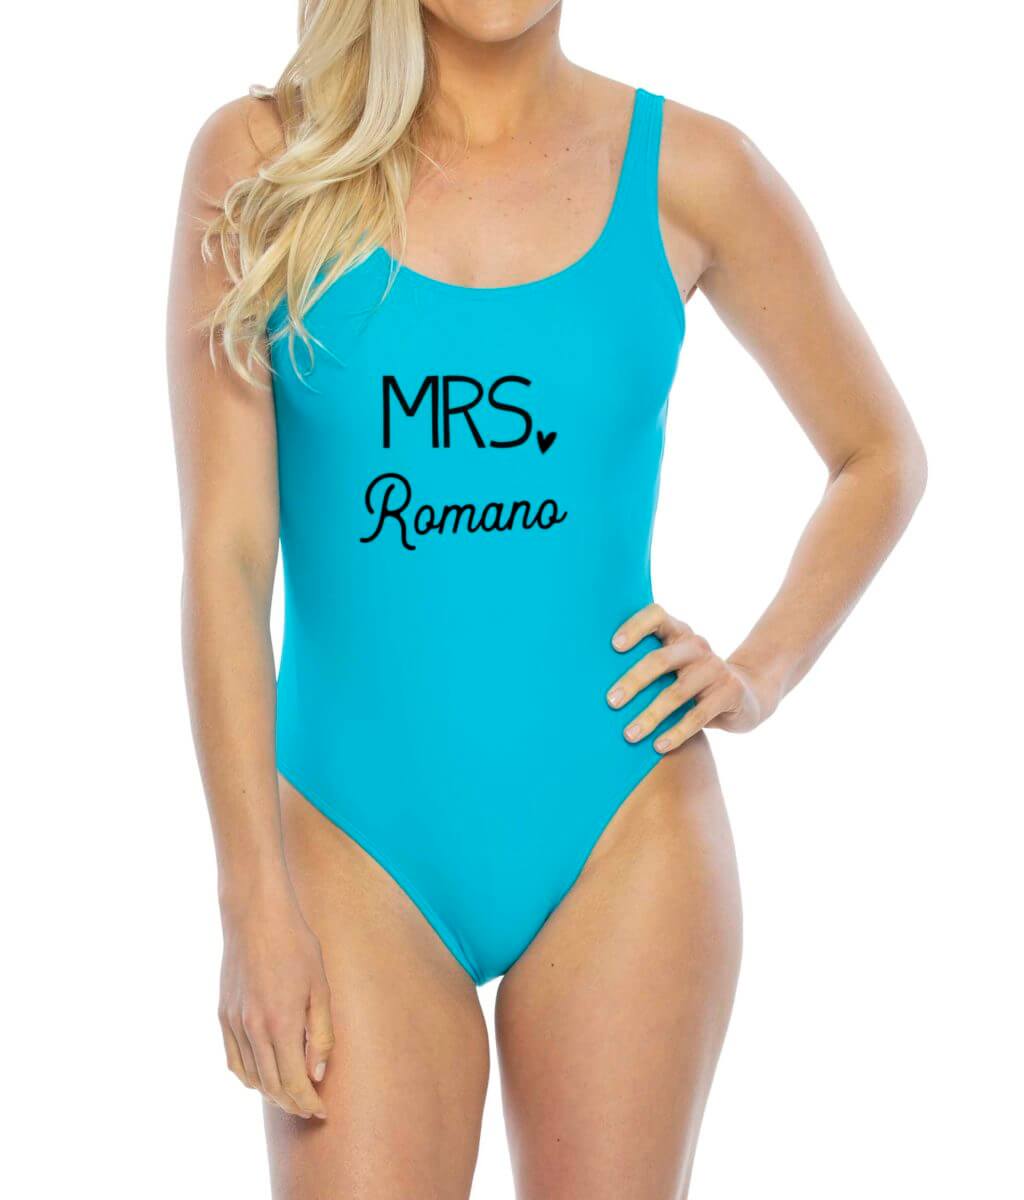 Personalized Swimsuit - The Paisley Box